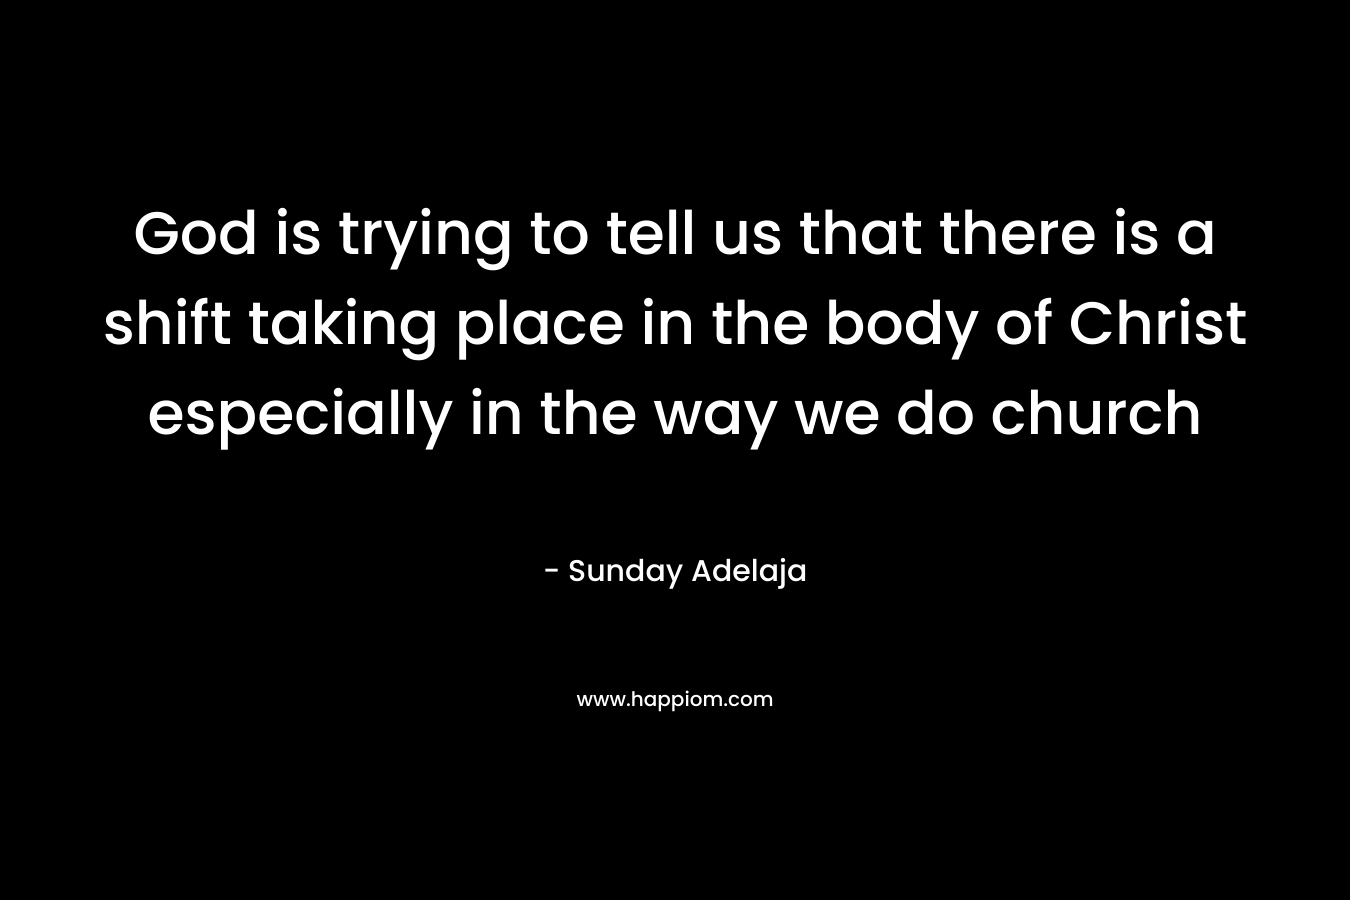 God is trying to tell us that there is a shift taking place in the body of Christ especially in the way we do church – Sunday Adelaja